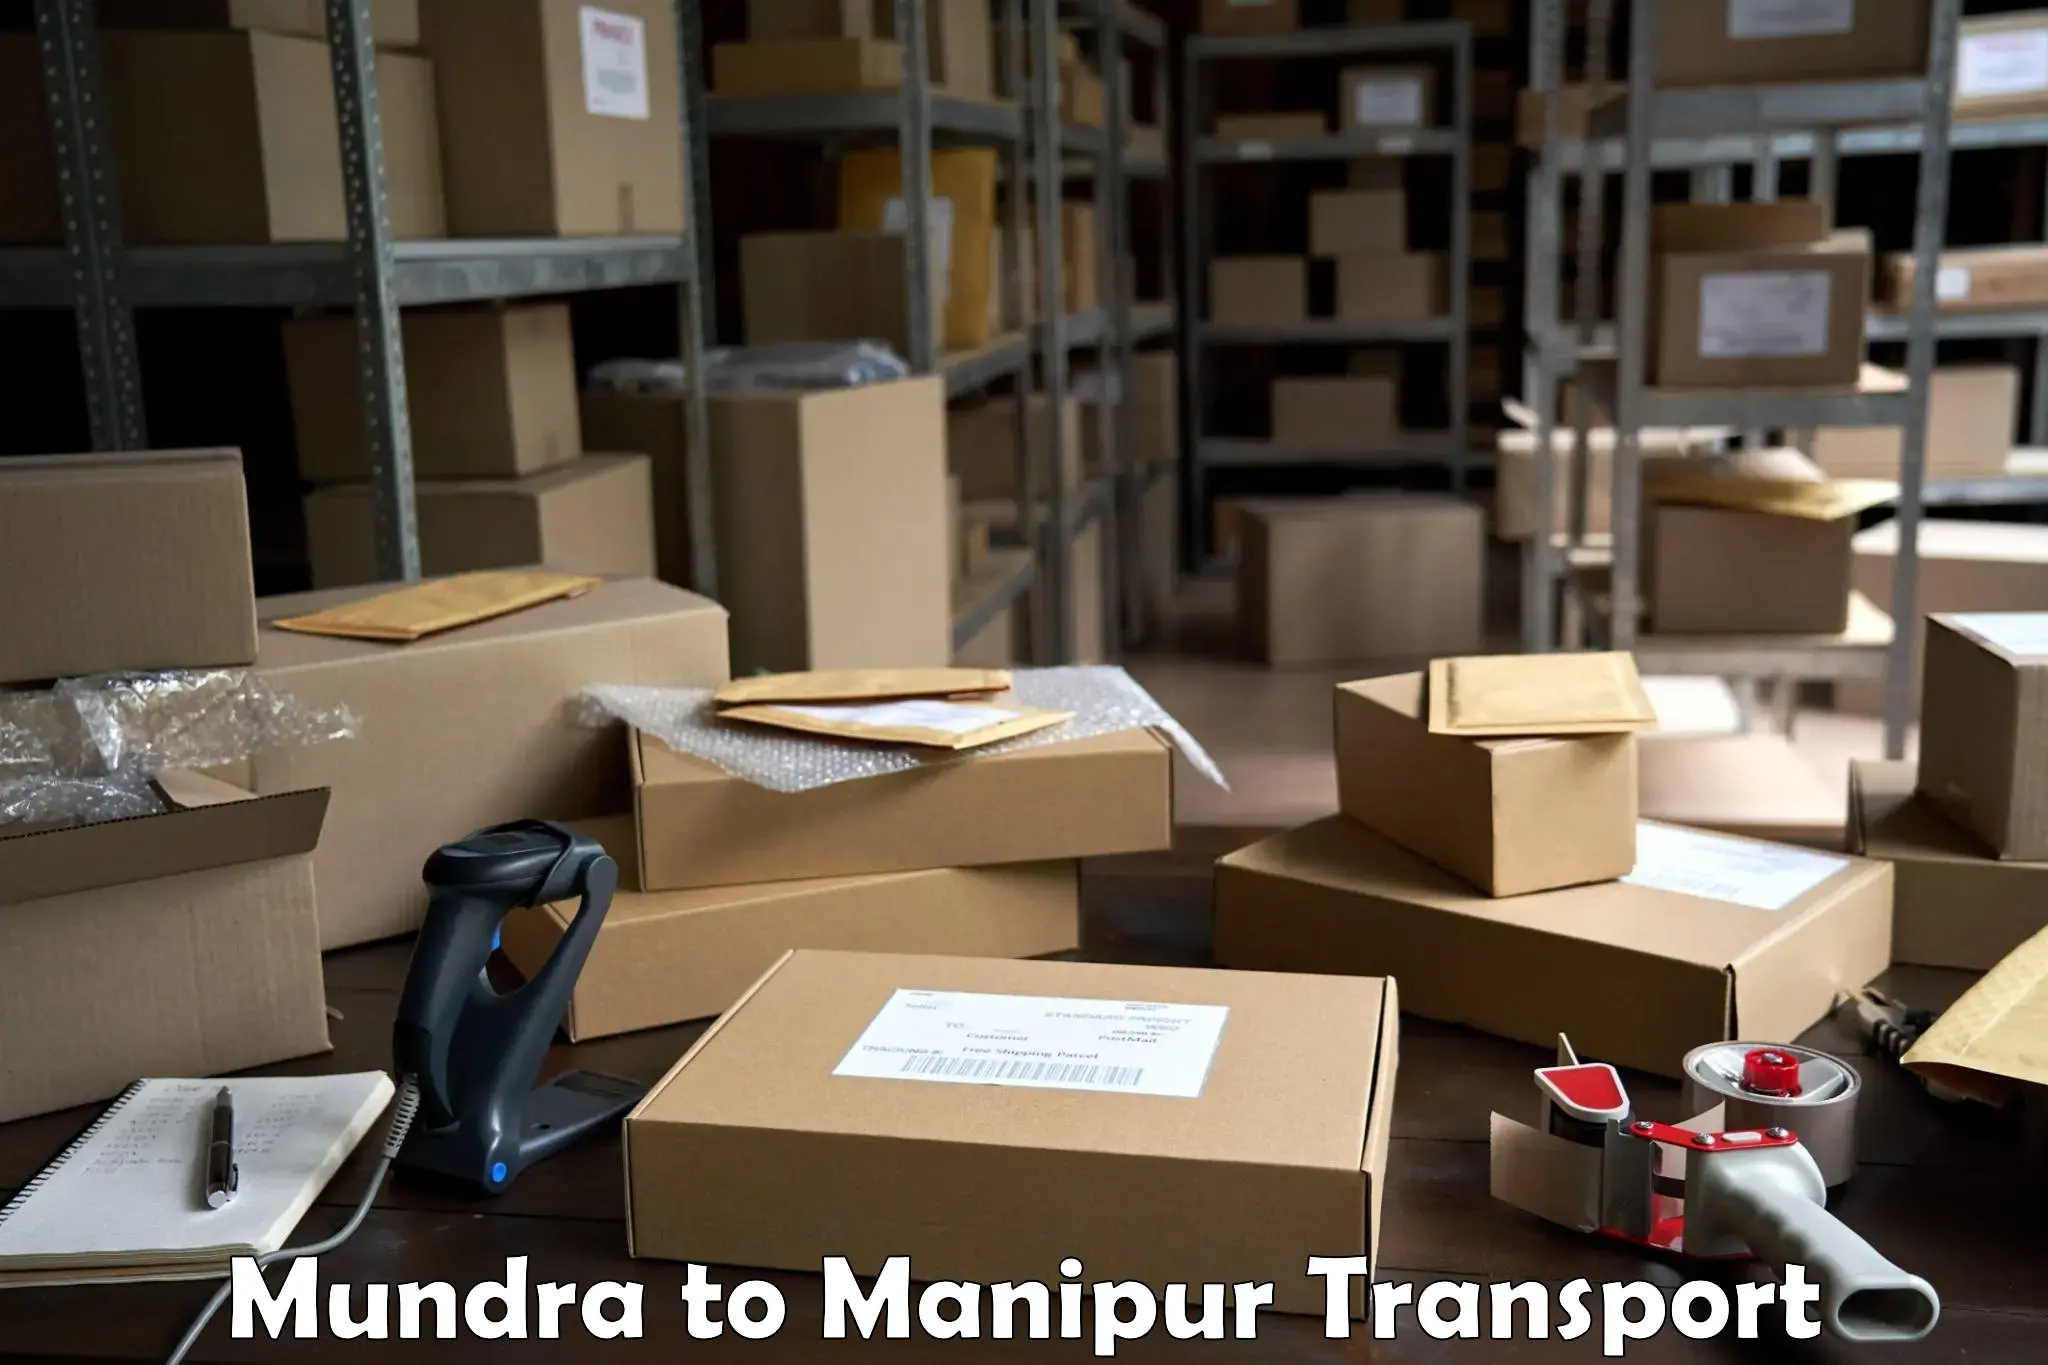 Commercial transport service Mundra to Manipur